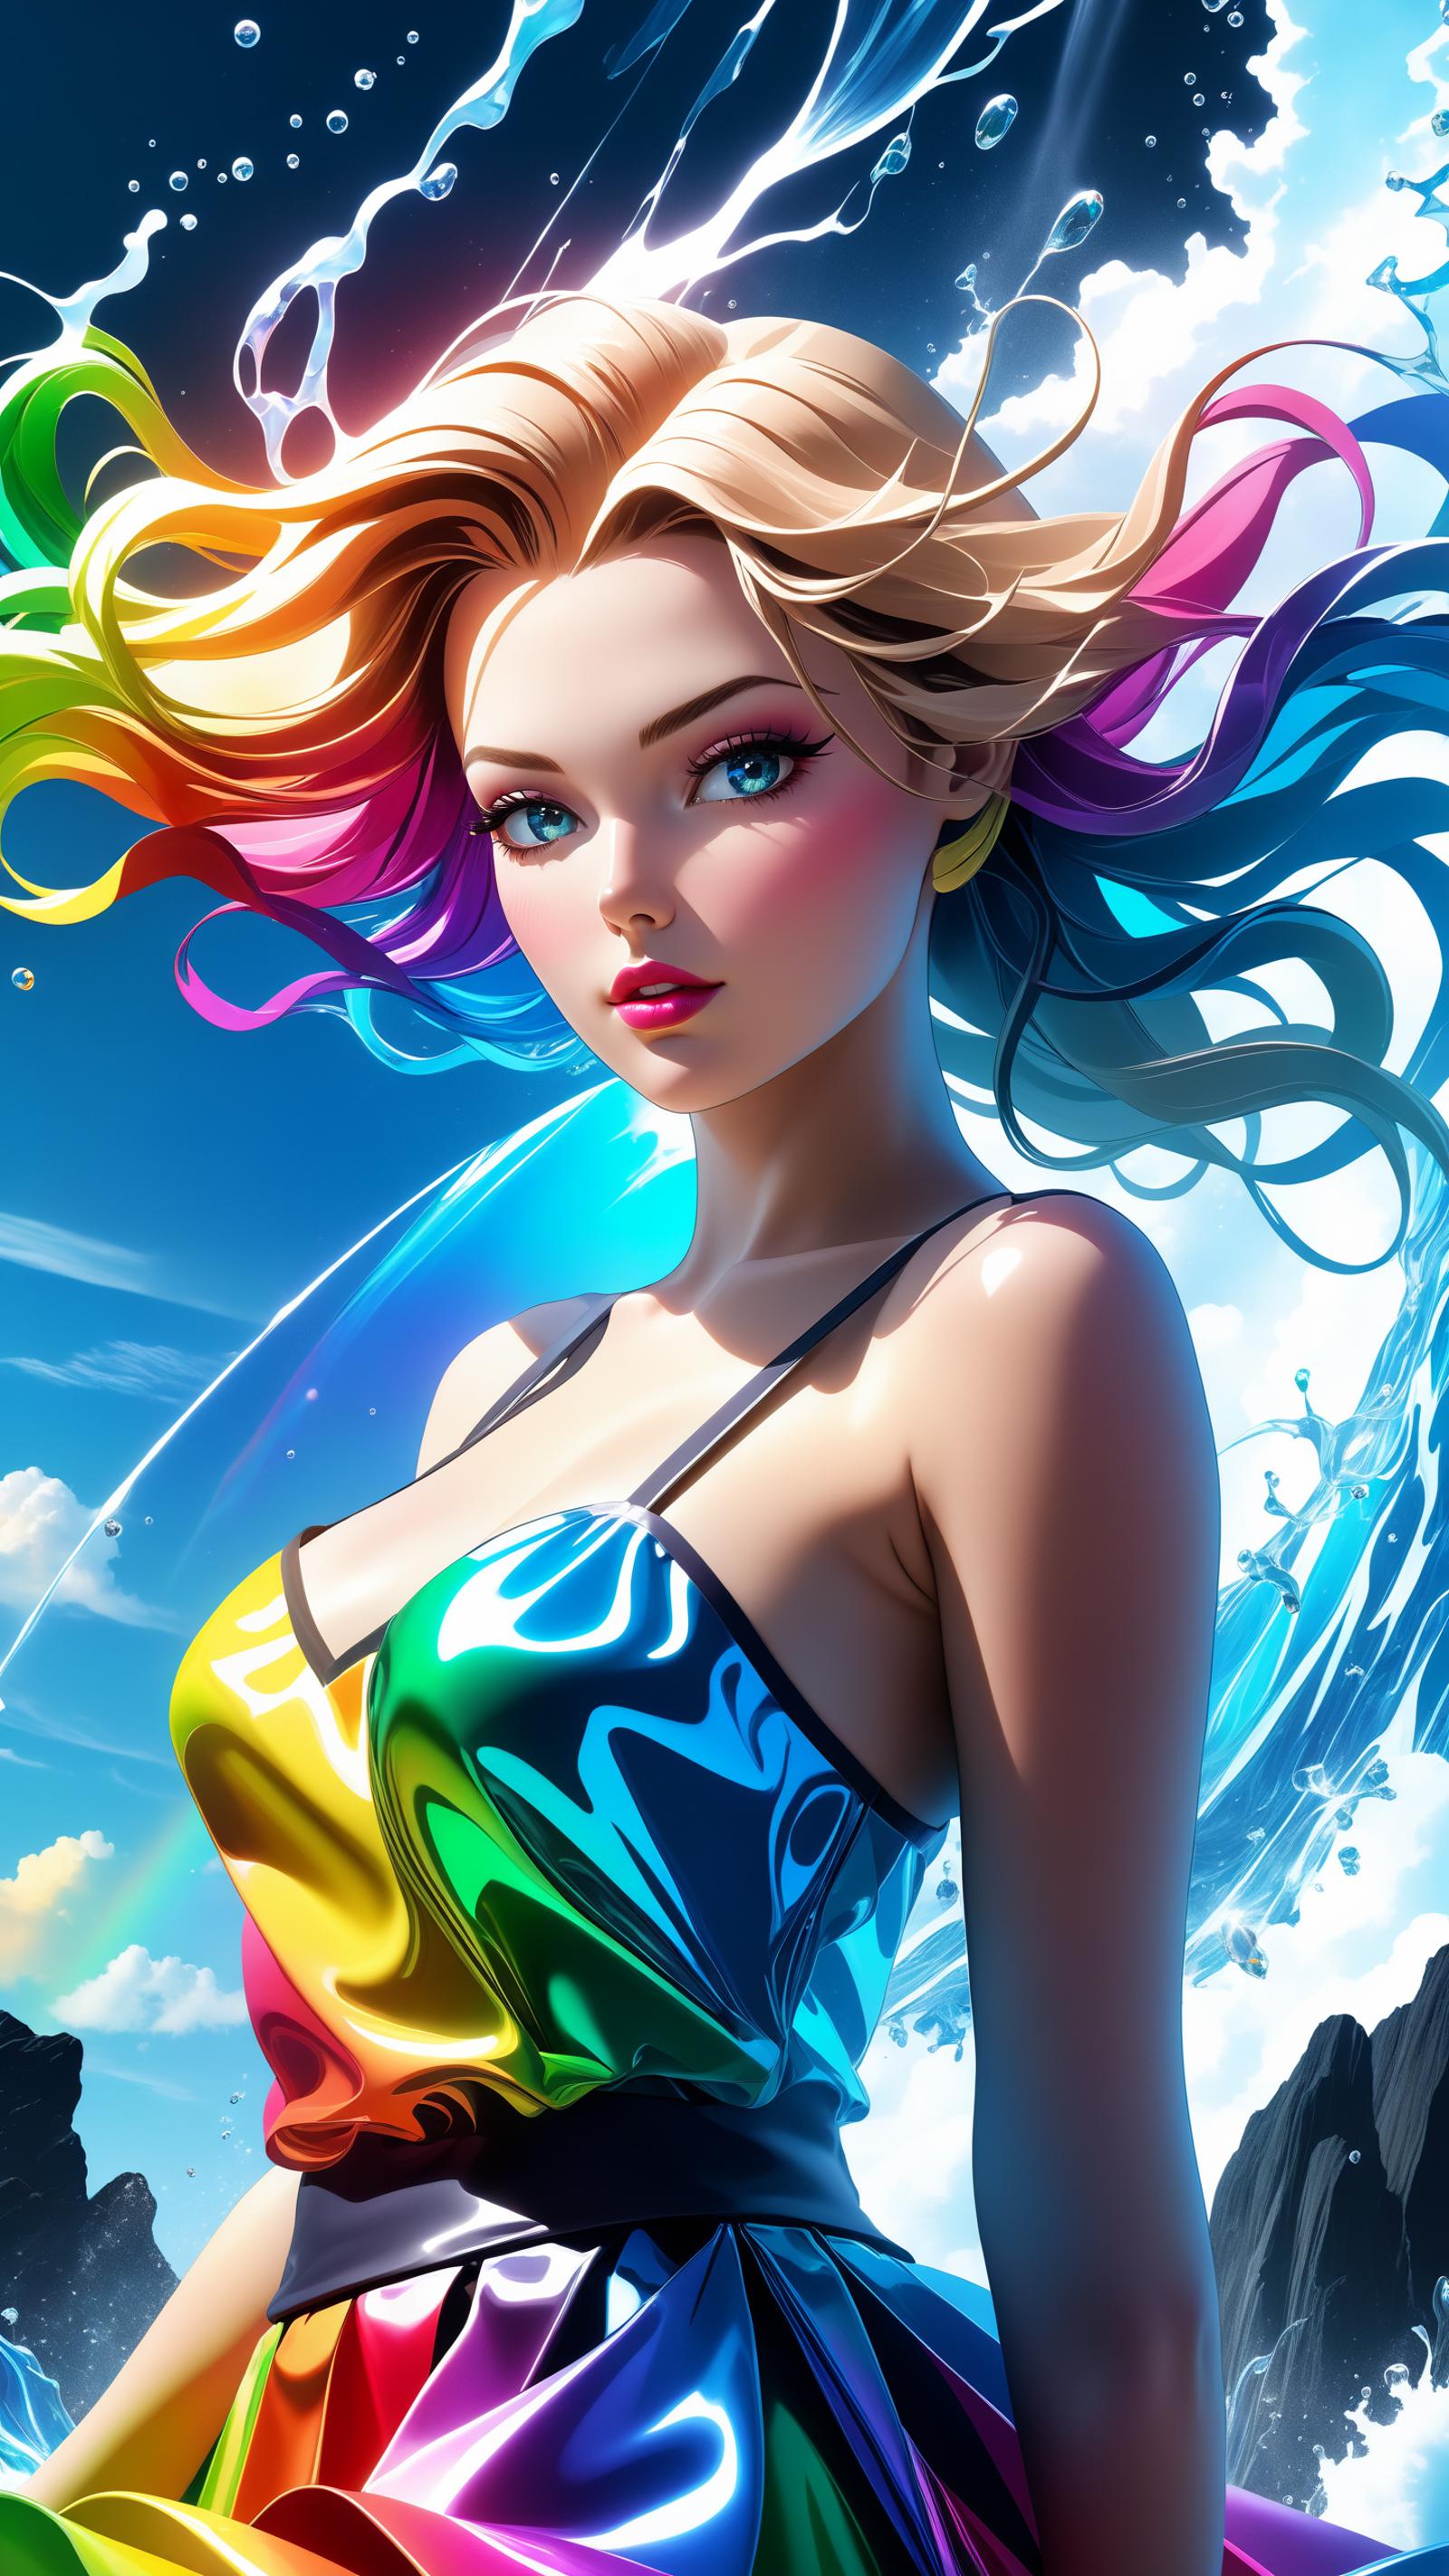 Colorful Cartoon Illustration of a Woman in a Rainbow Swimsuit